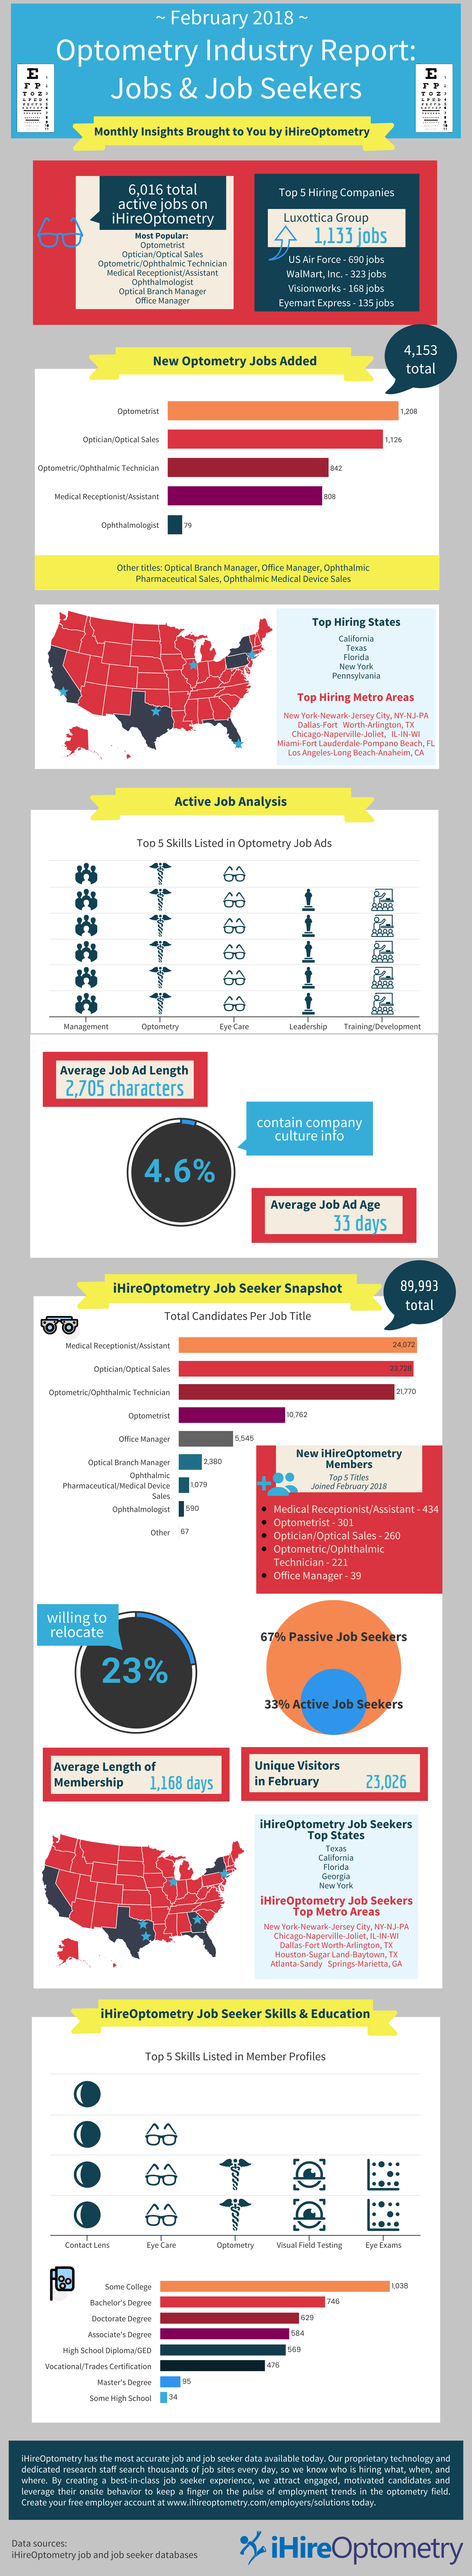 iHireOptometry industry report infographic for February 2018